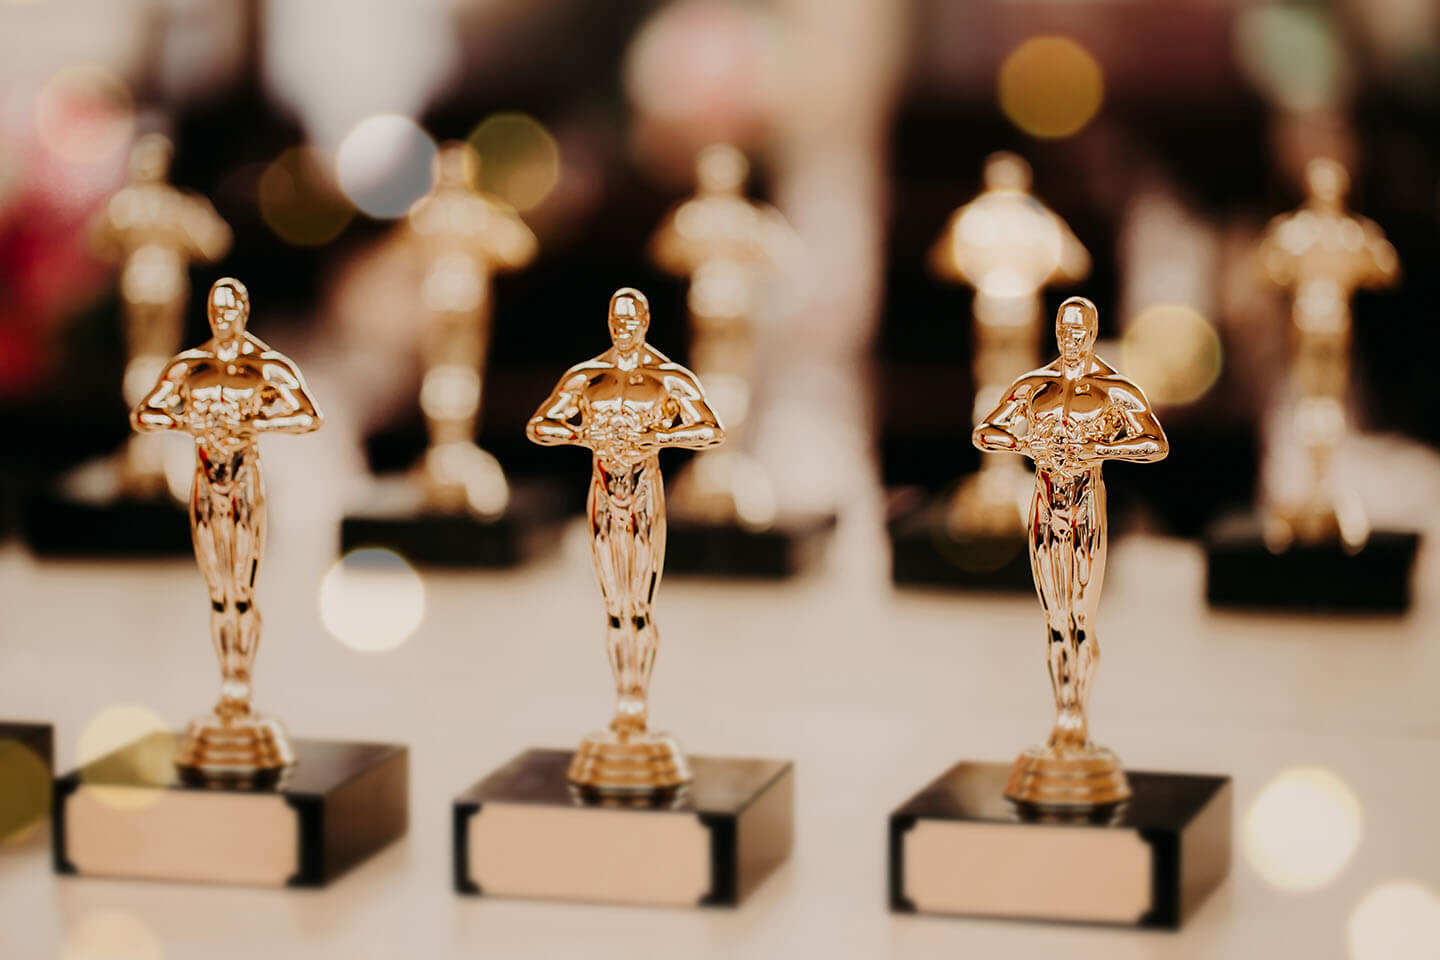 96th Oscar Rules Announced, Here's What Film & Documentary Filmmakers Should Know - Indie Shorts Mag